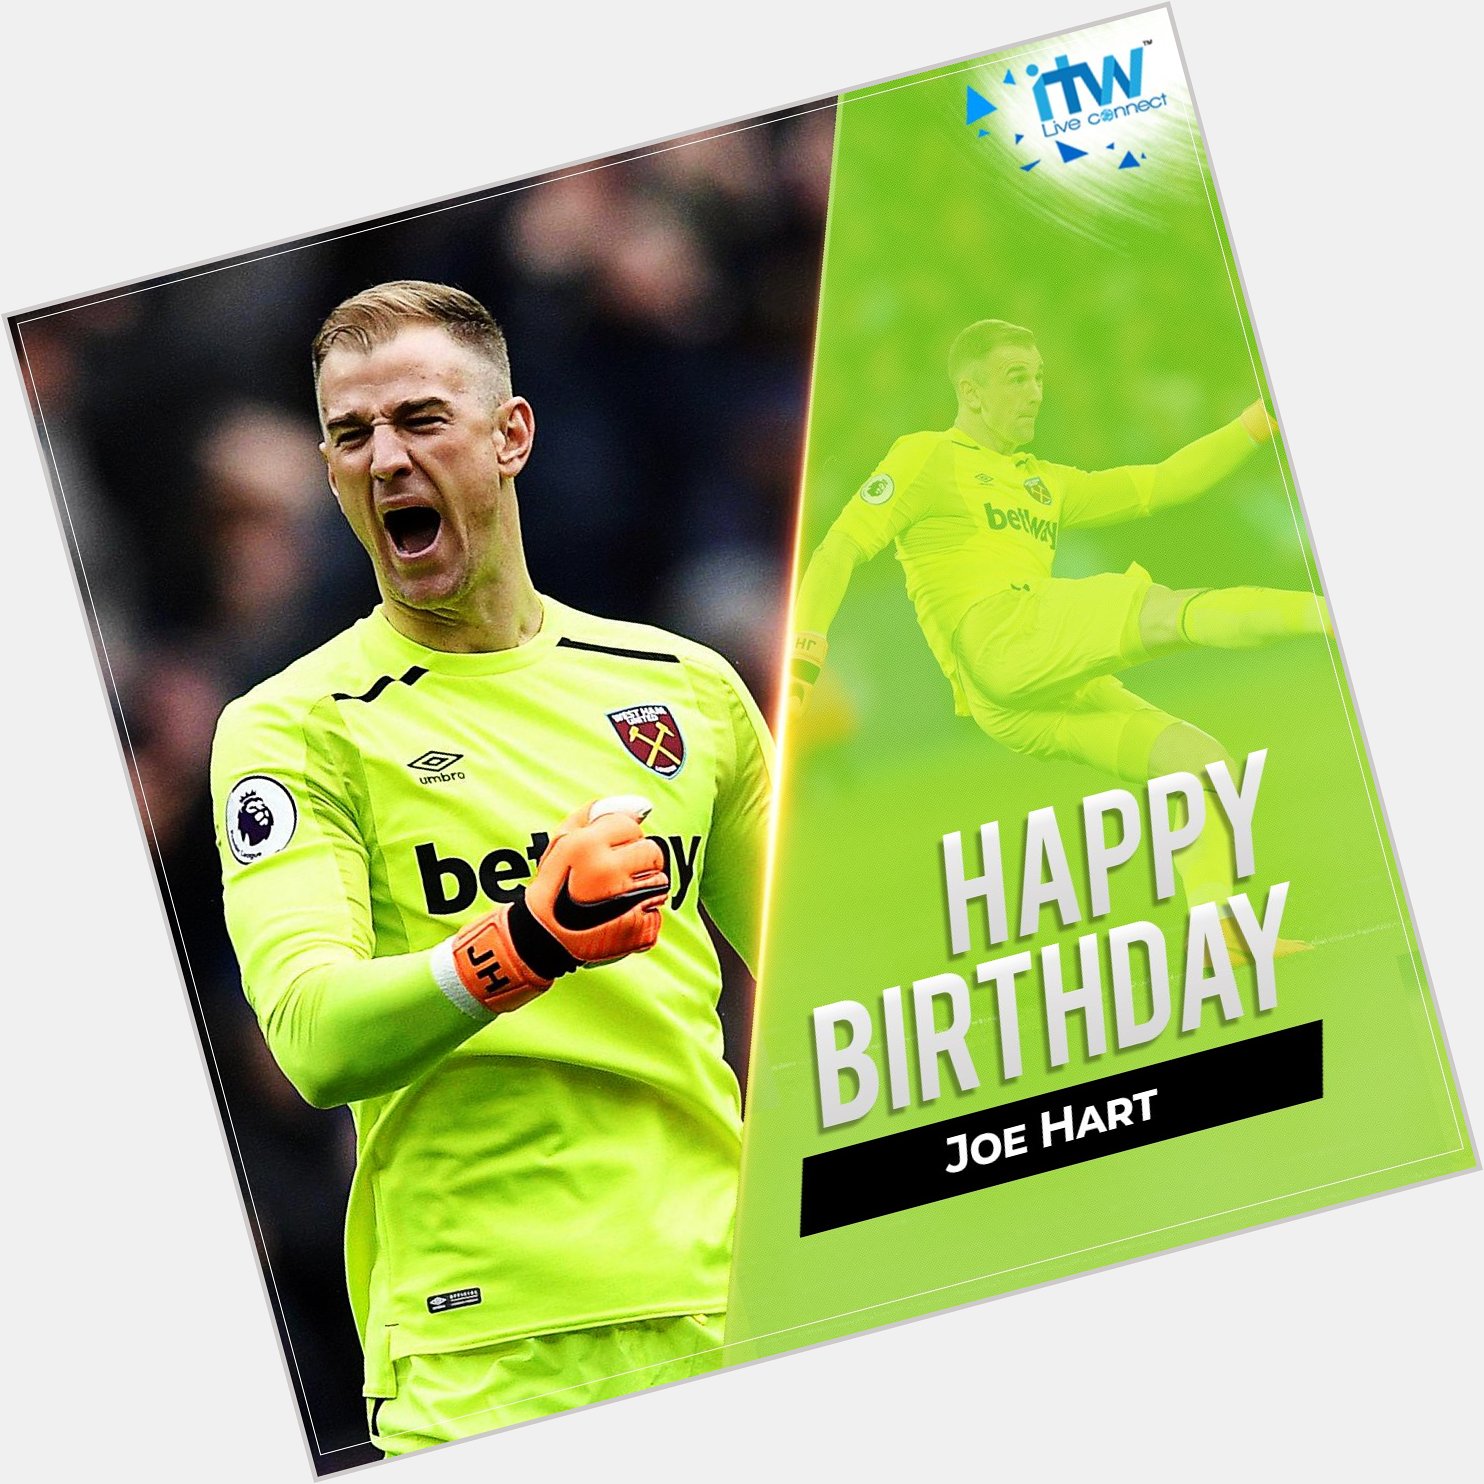 Wishing Joe Hart a very Happy Birthday! The and shot-stopper turns 31 today. 